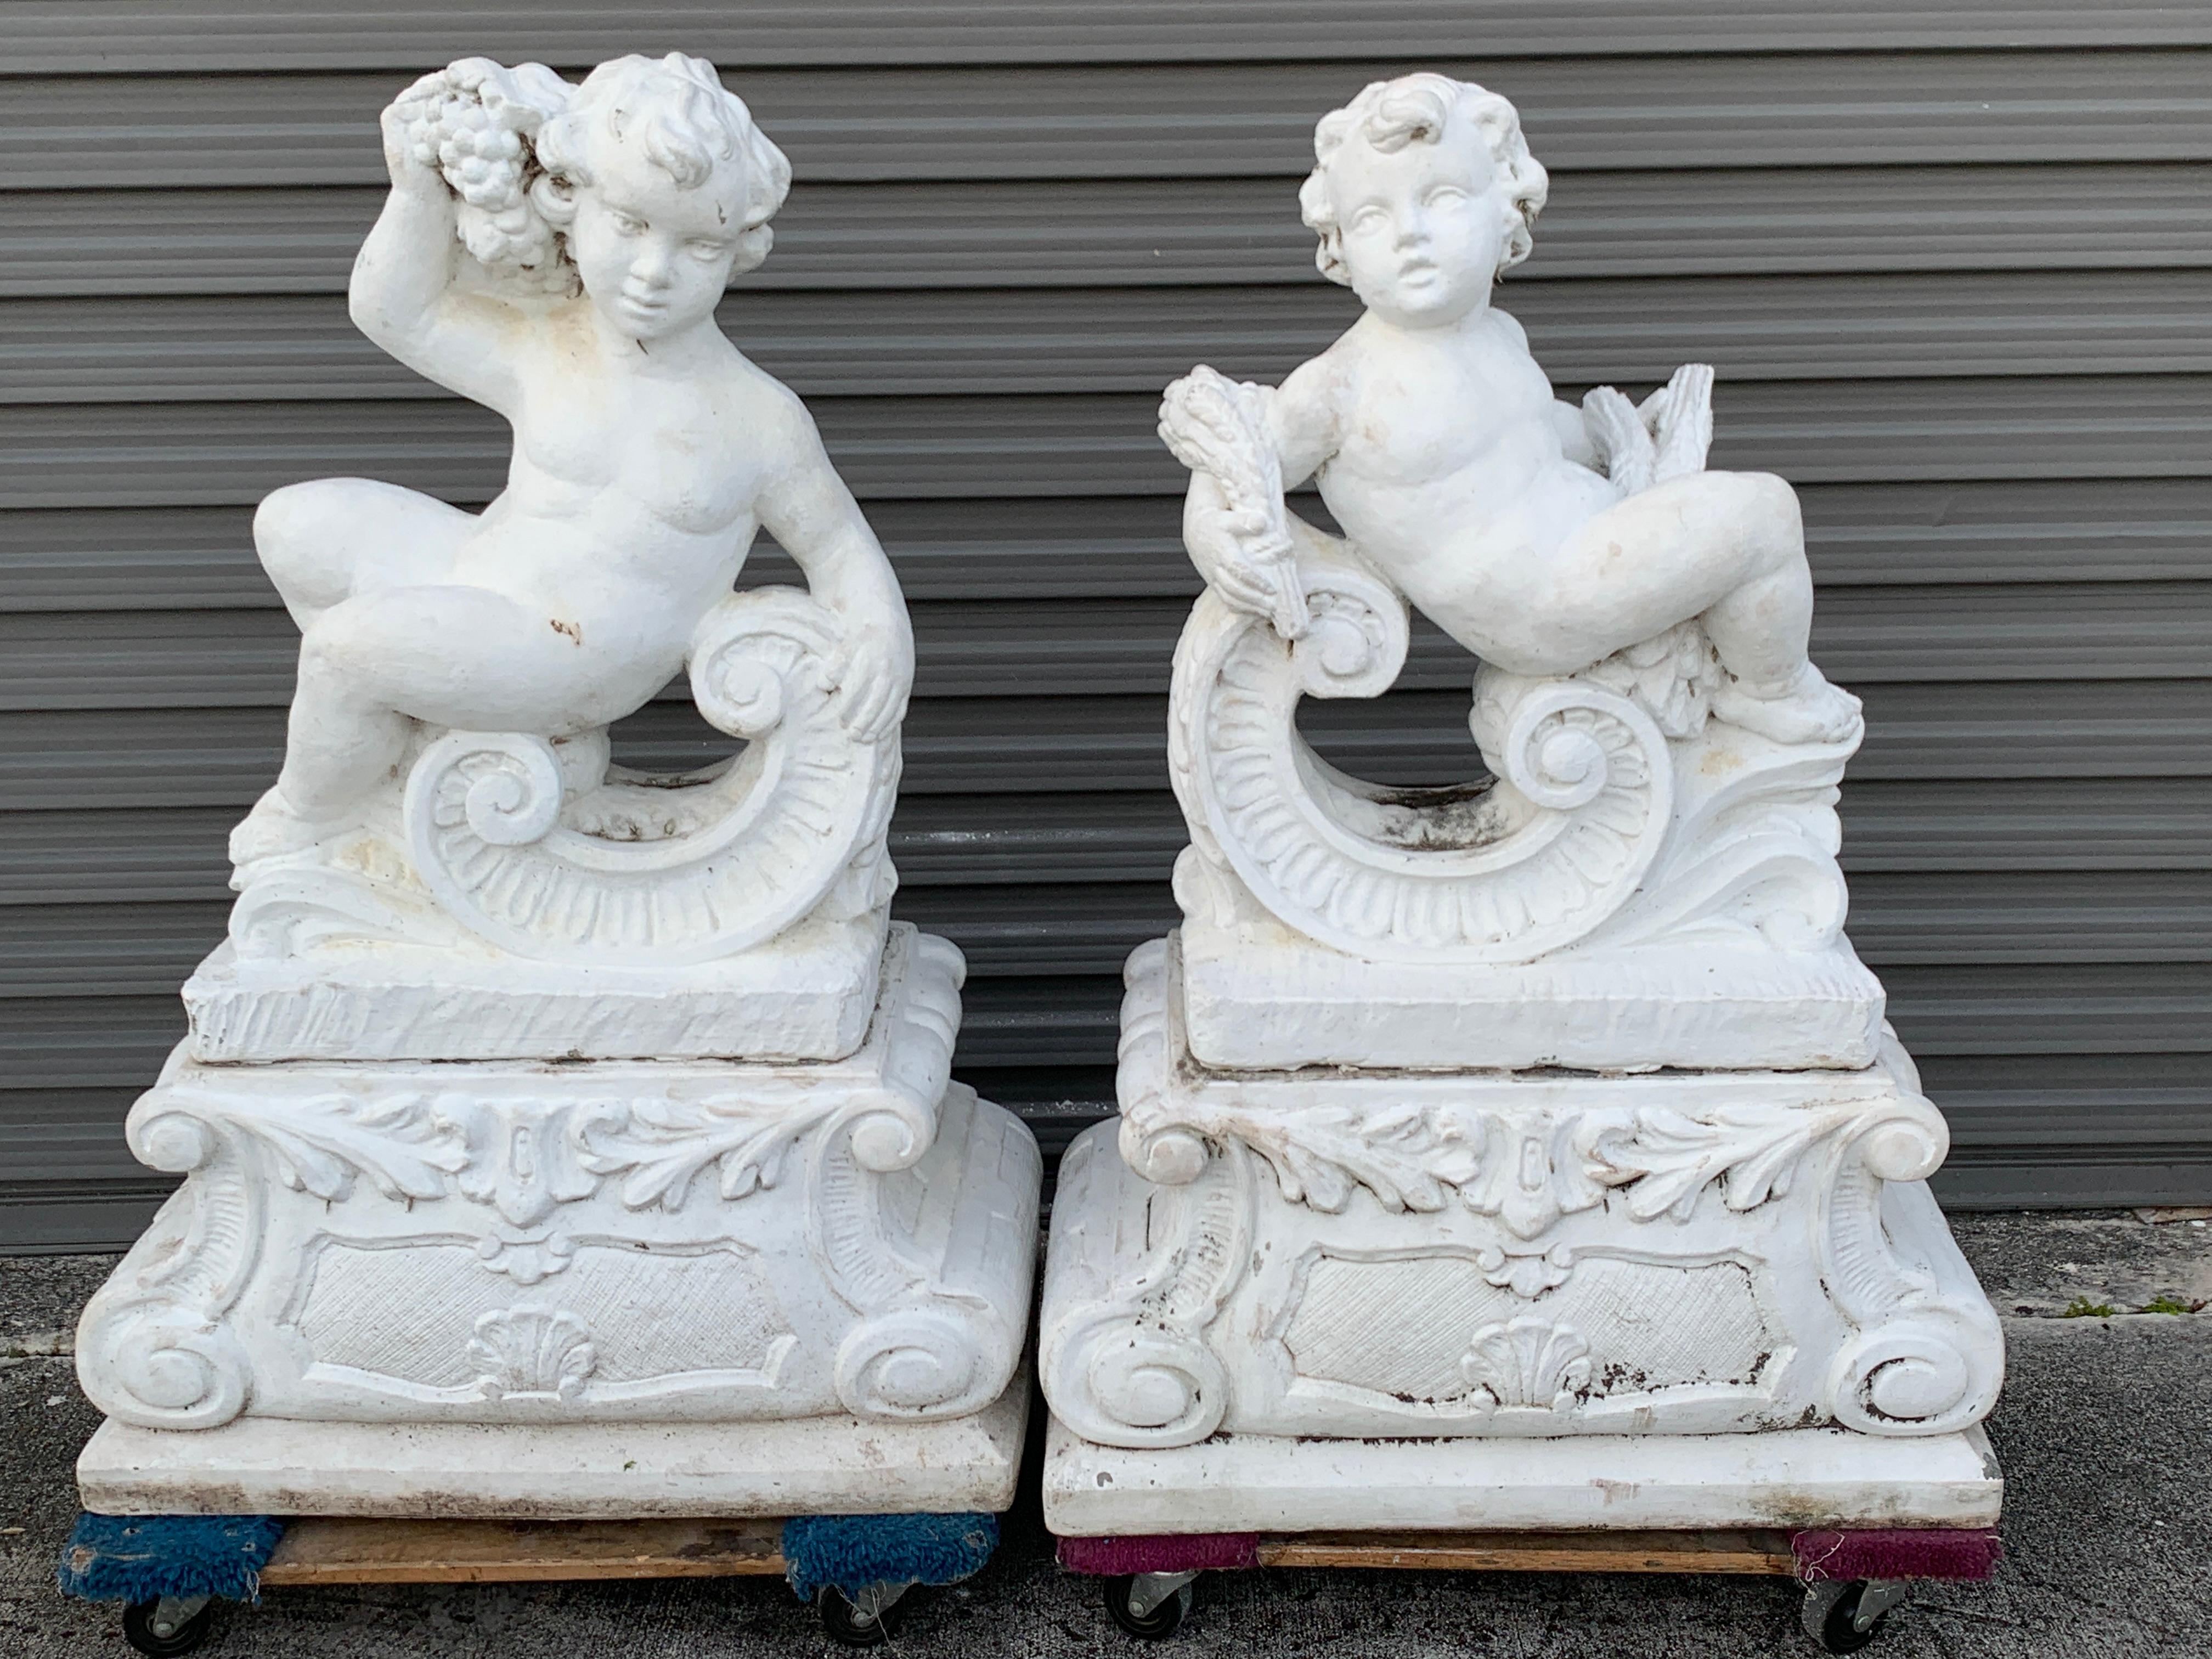 Pair of Vintage Cast Stone Statues of Recumbent Putti on Pedestal Bases
Impressive works, a left and right, beautifully modeled and polychromed white, ready to place
Each figure measures 12